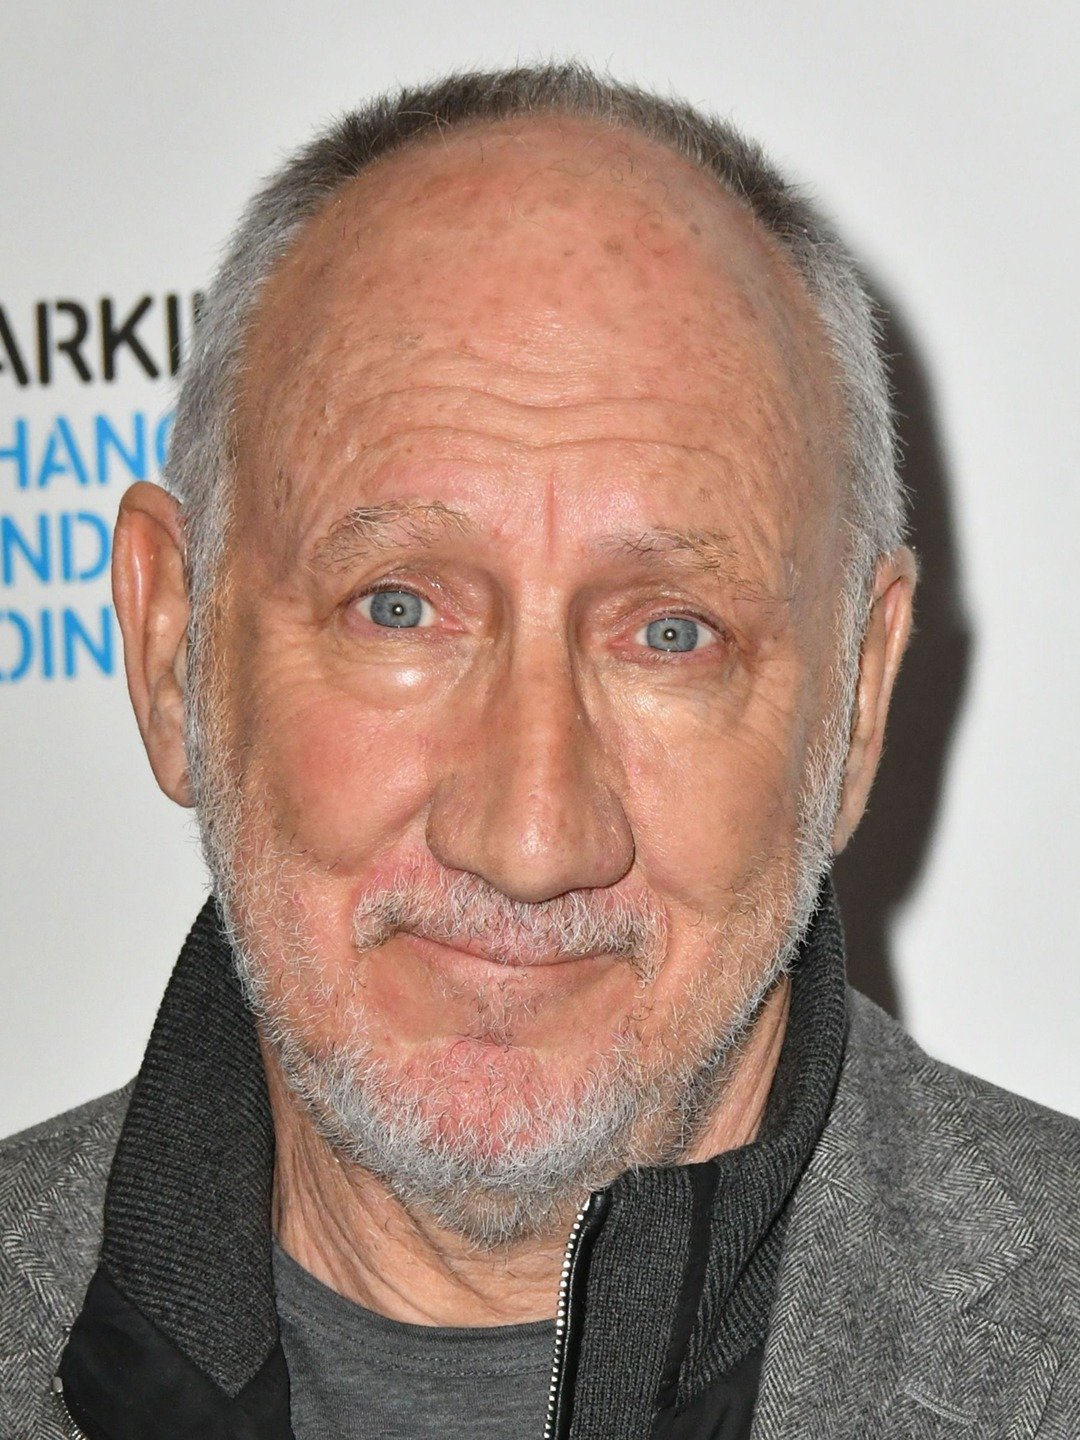 How tall is Pete Townshend?